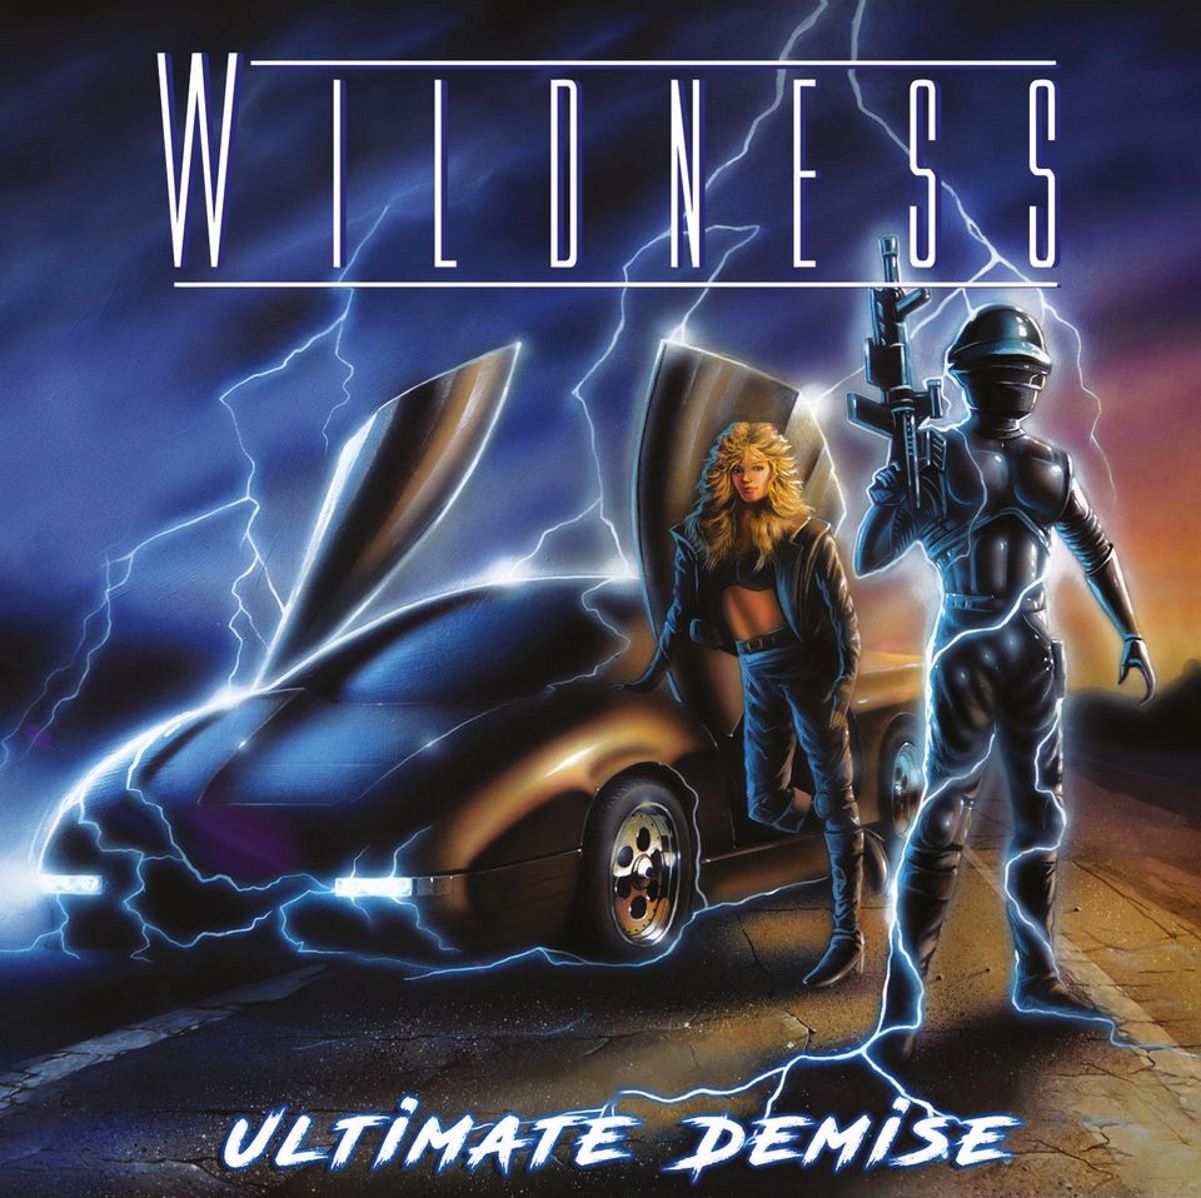 wildness - ultimate demise - album cover